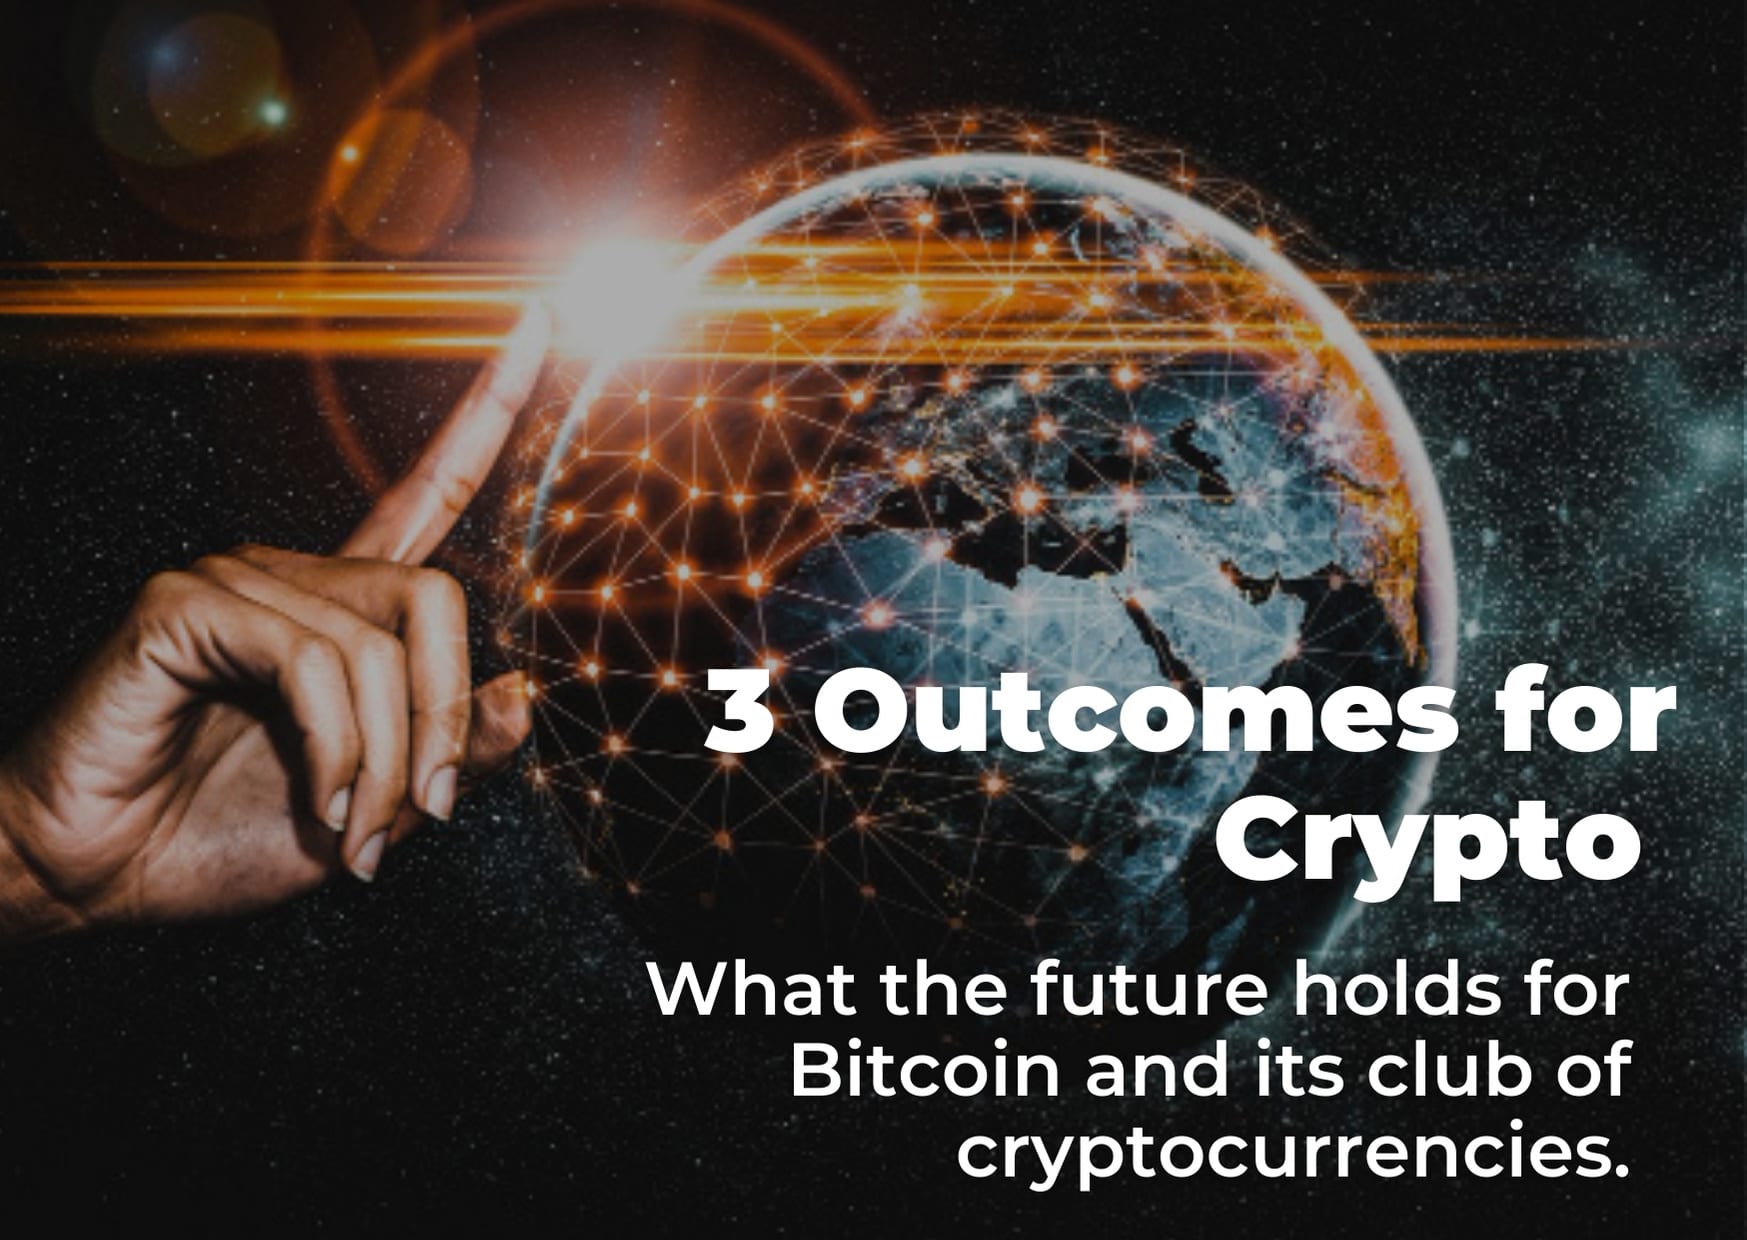 3 Outcomes for Crypto in 2021 and Beyond What does the future hold for Bitcoin and its club of cryptocurrencies?